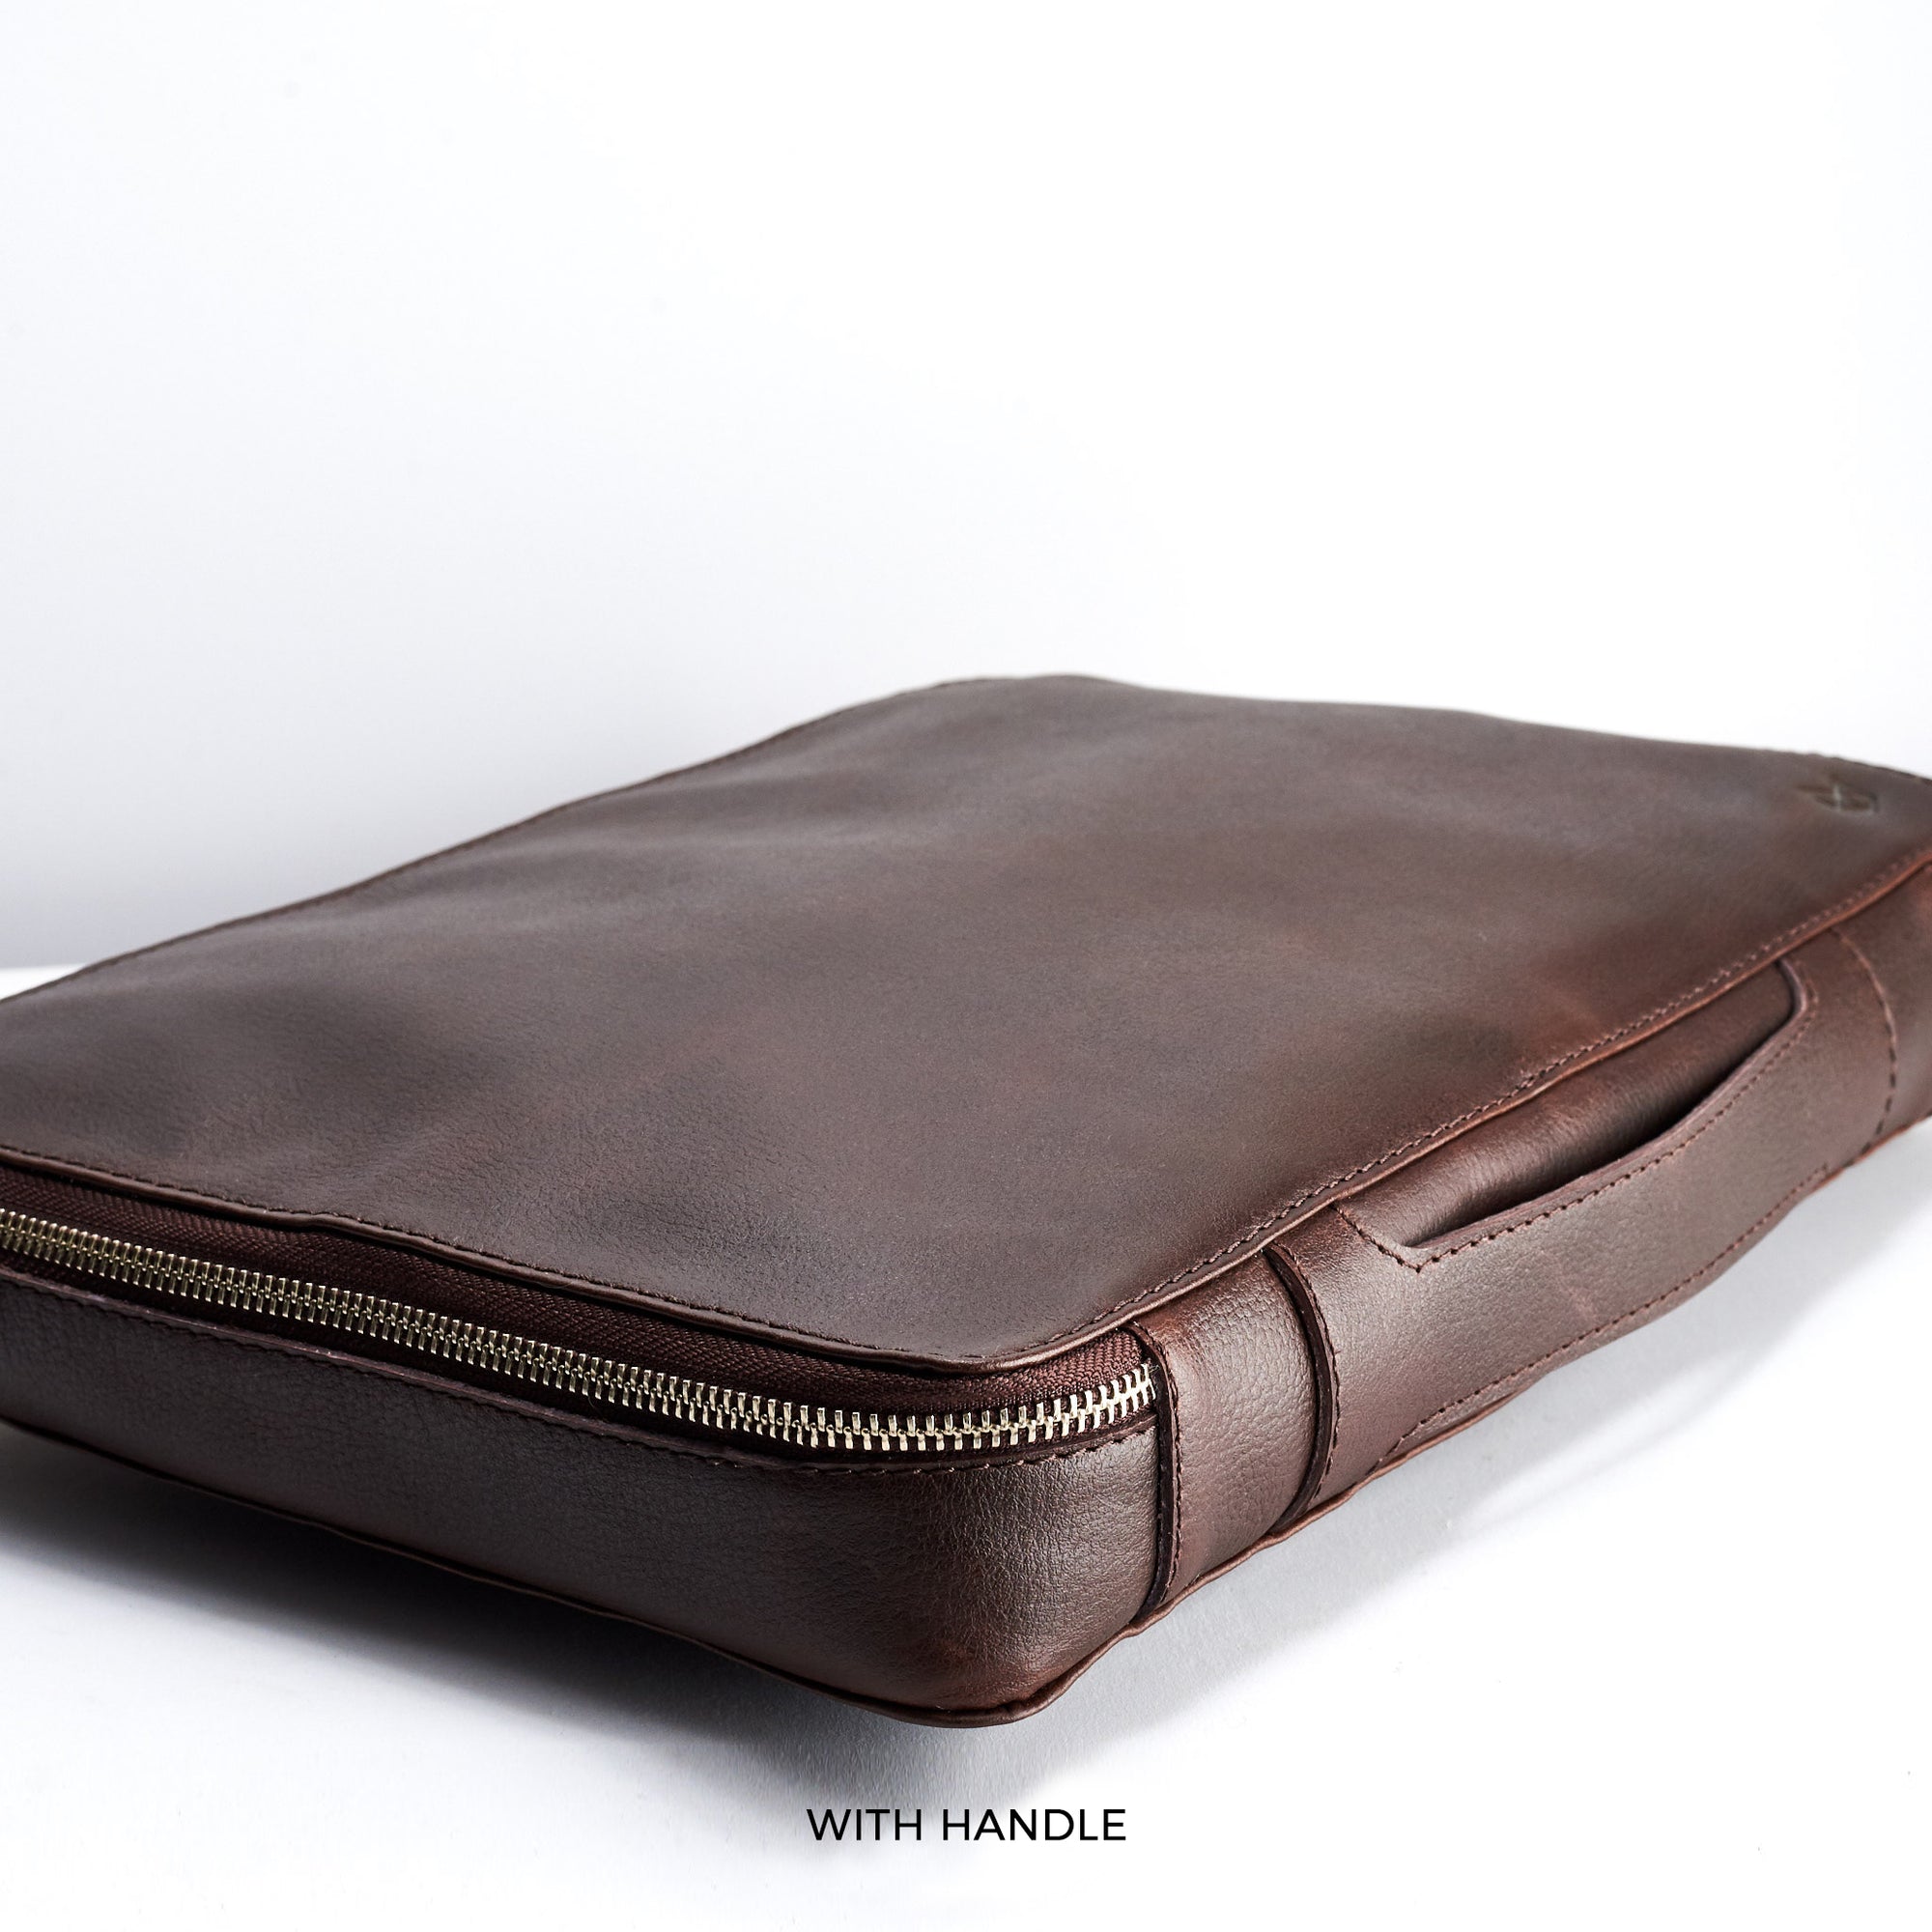 Optional leather handle. Best tech pouch dark brown by Capra Leather. Fits MacBook Pro 14-inch